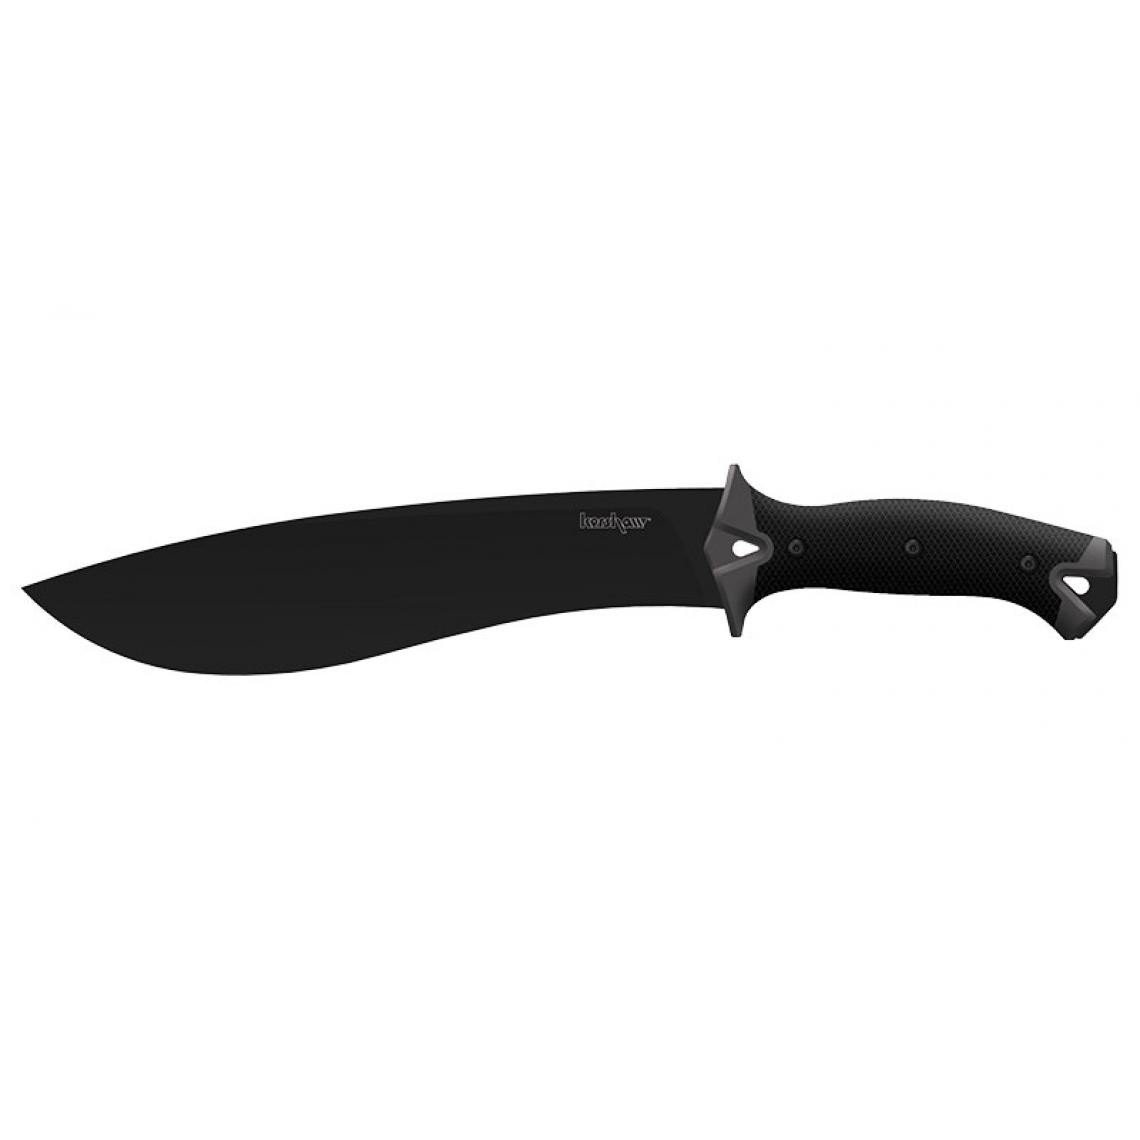 Divers Marques - KERSHAW - KW1077 - CAMP 10 - Outils de coupe